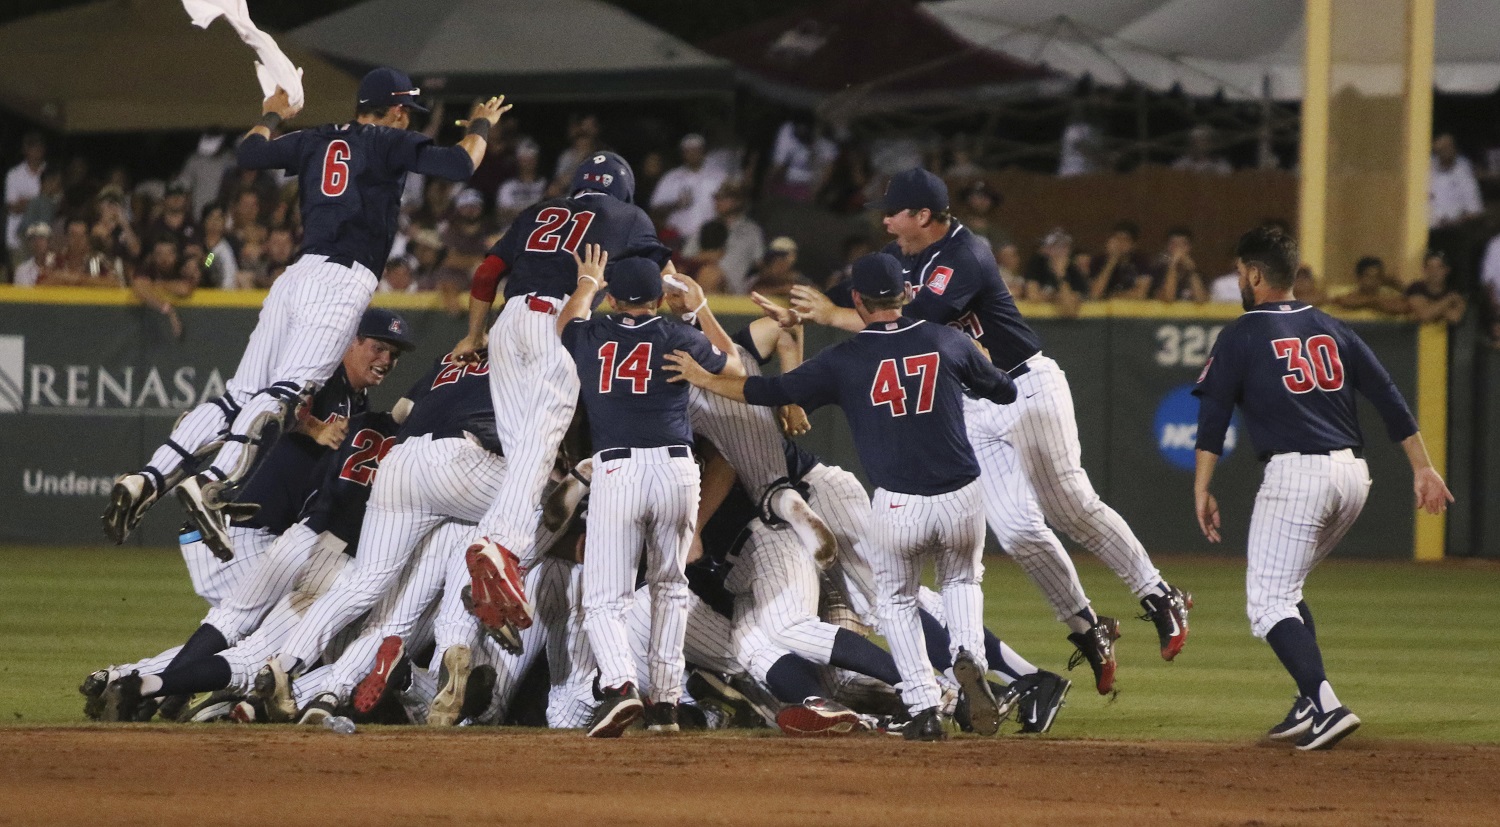 Arizona players celebrate after defeating Mississippi State 6-5 in 11 innings during an NCAA college baseball tournament super regional game in Starkville, Miss., Saturday, June 11, 2016. (AP Photo/Jim Lytle)